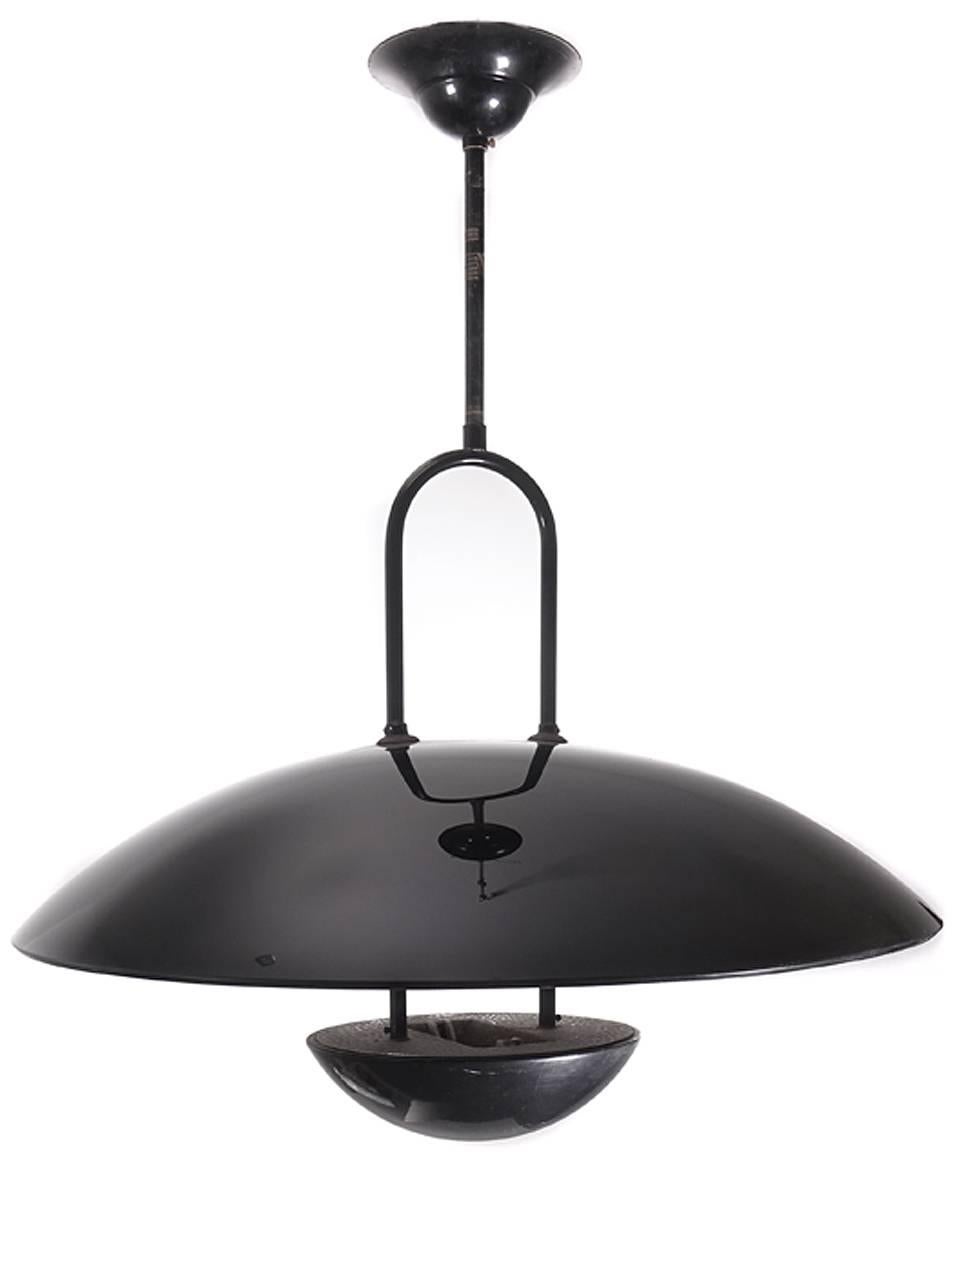 The 24 inch top dome is heavy opaque black glass. The inside is mat ground glass with a deeply grooved pattern. The dome top is gloss. Everything else is has a black paint finish. The look is very clean and architectural. It takes one halogen bulb.